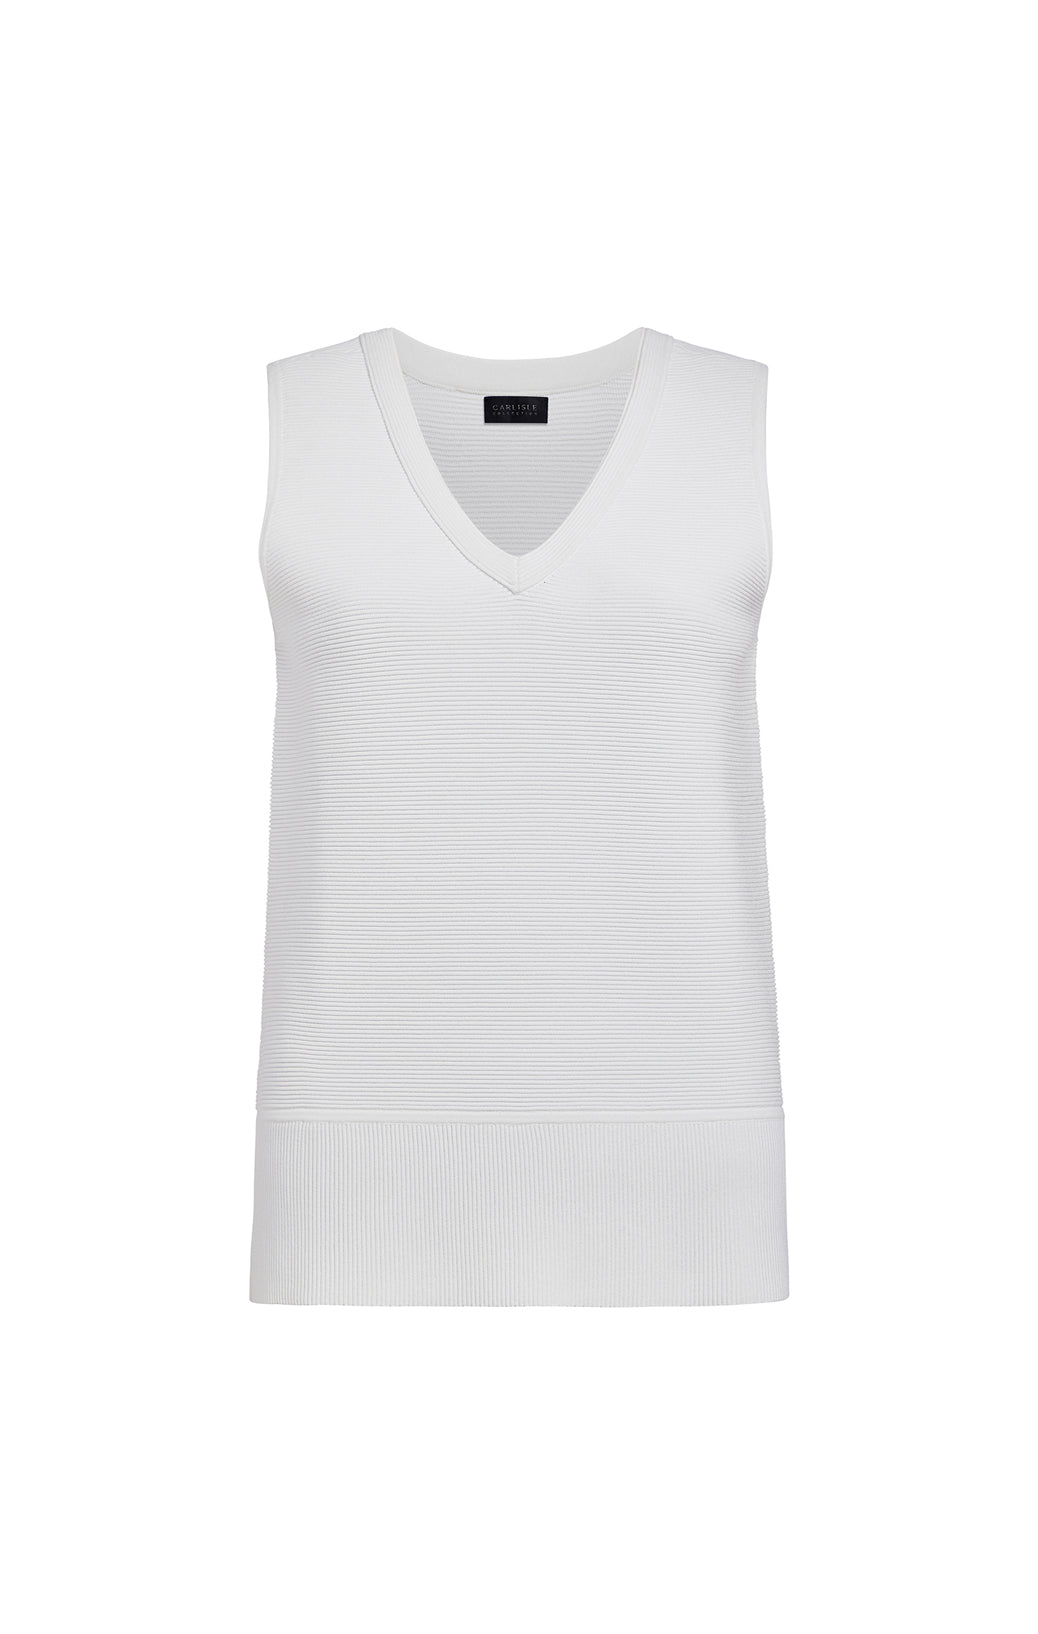 Balance-Wht - Organic Cotton Reversible Knit Top With Cami - Product Image